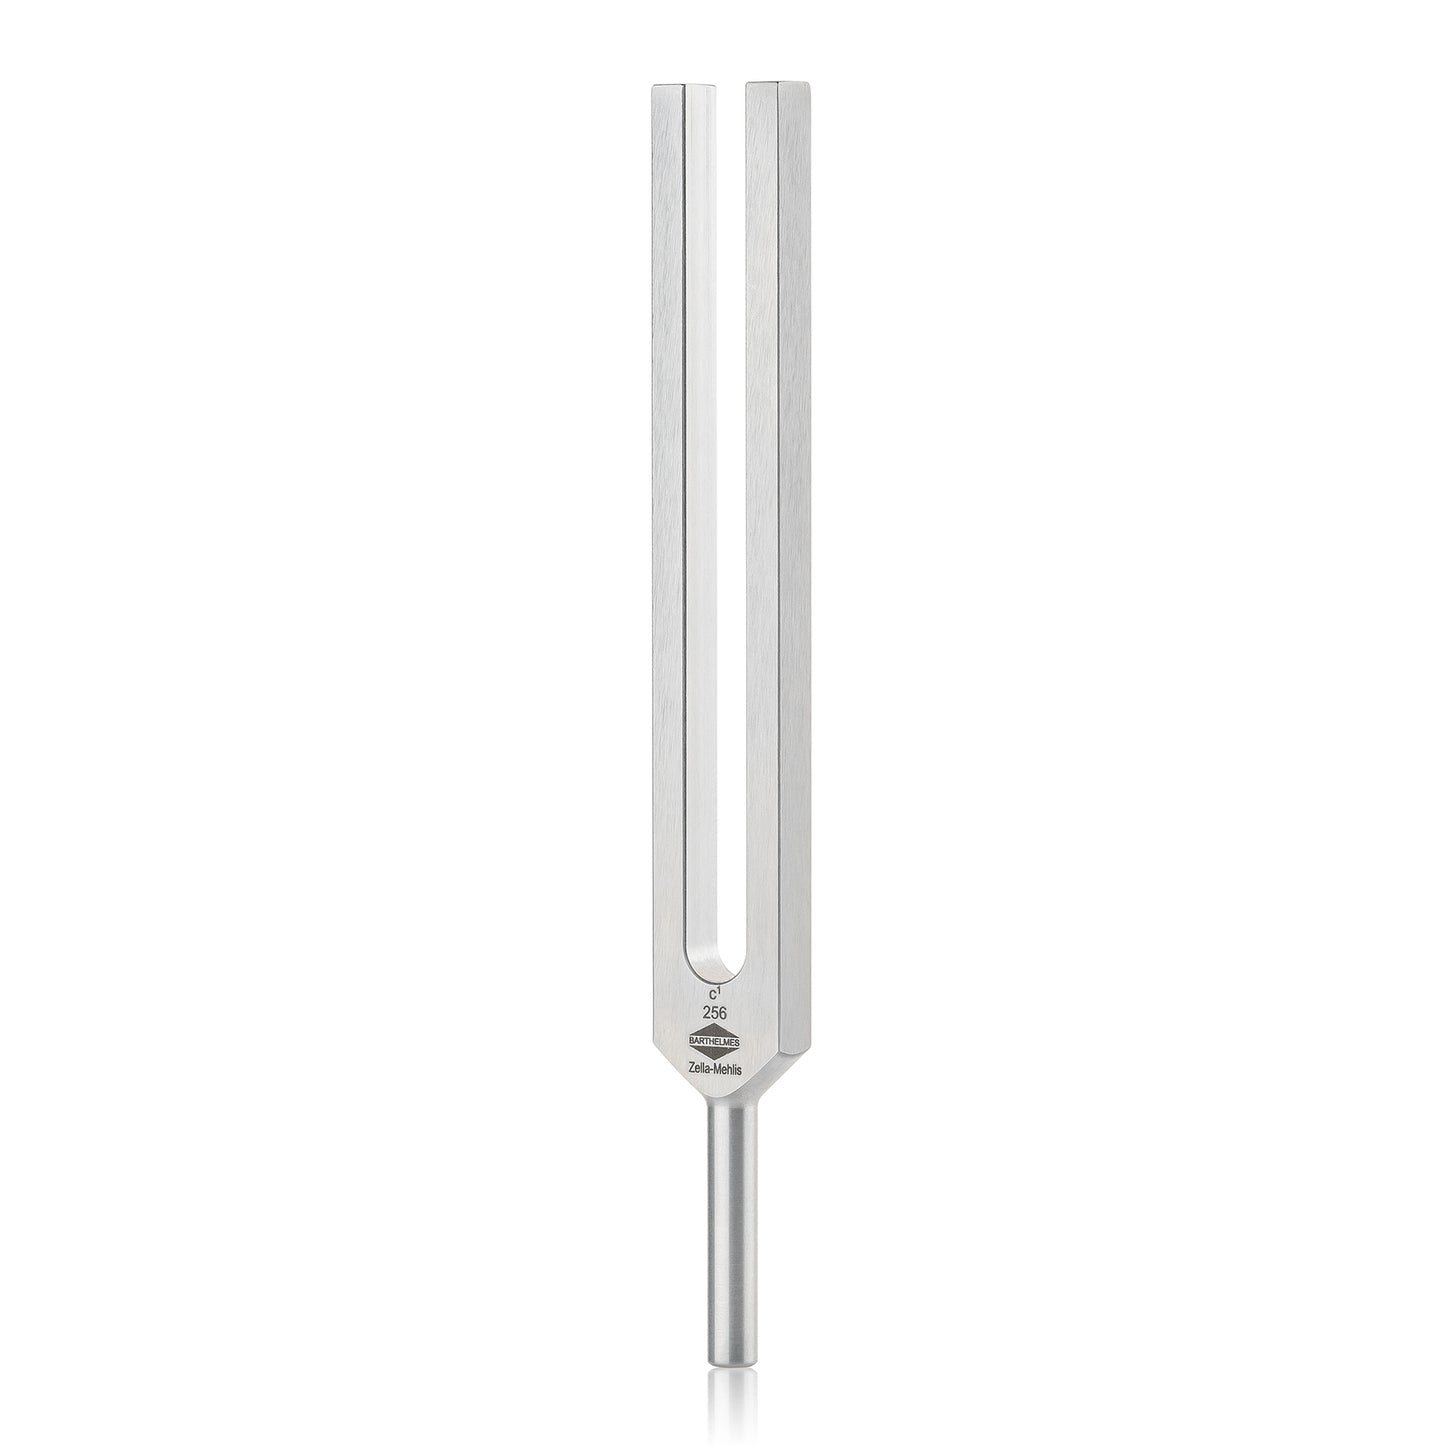 Barthelmes tuning fork c1 256 Hz for ear doctors made of light metal